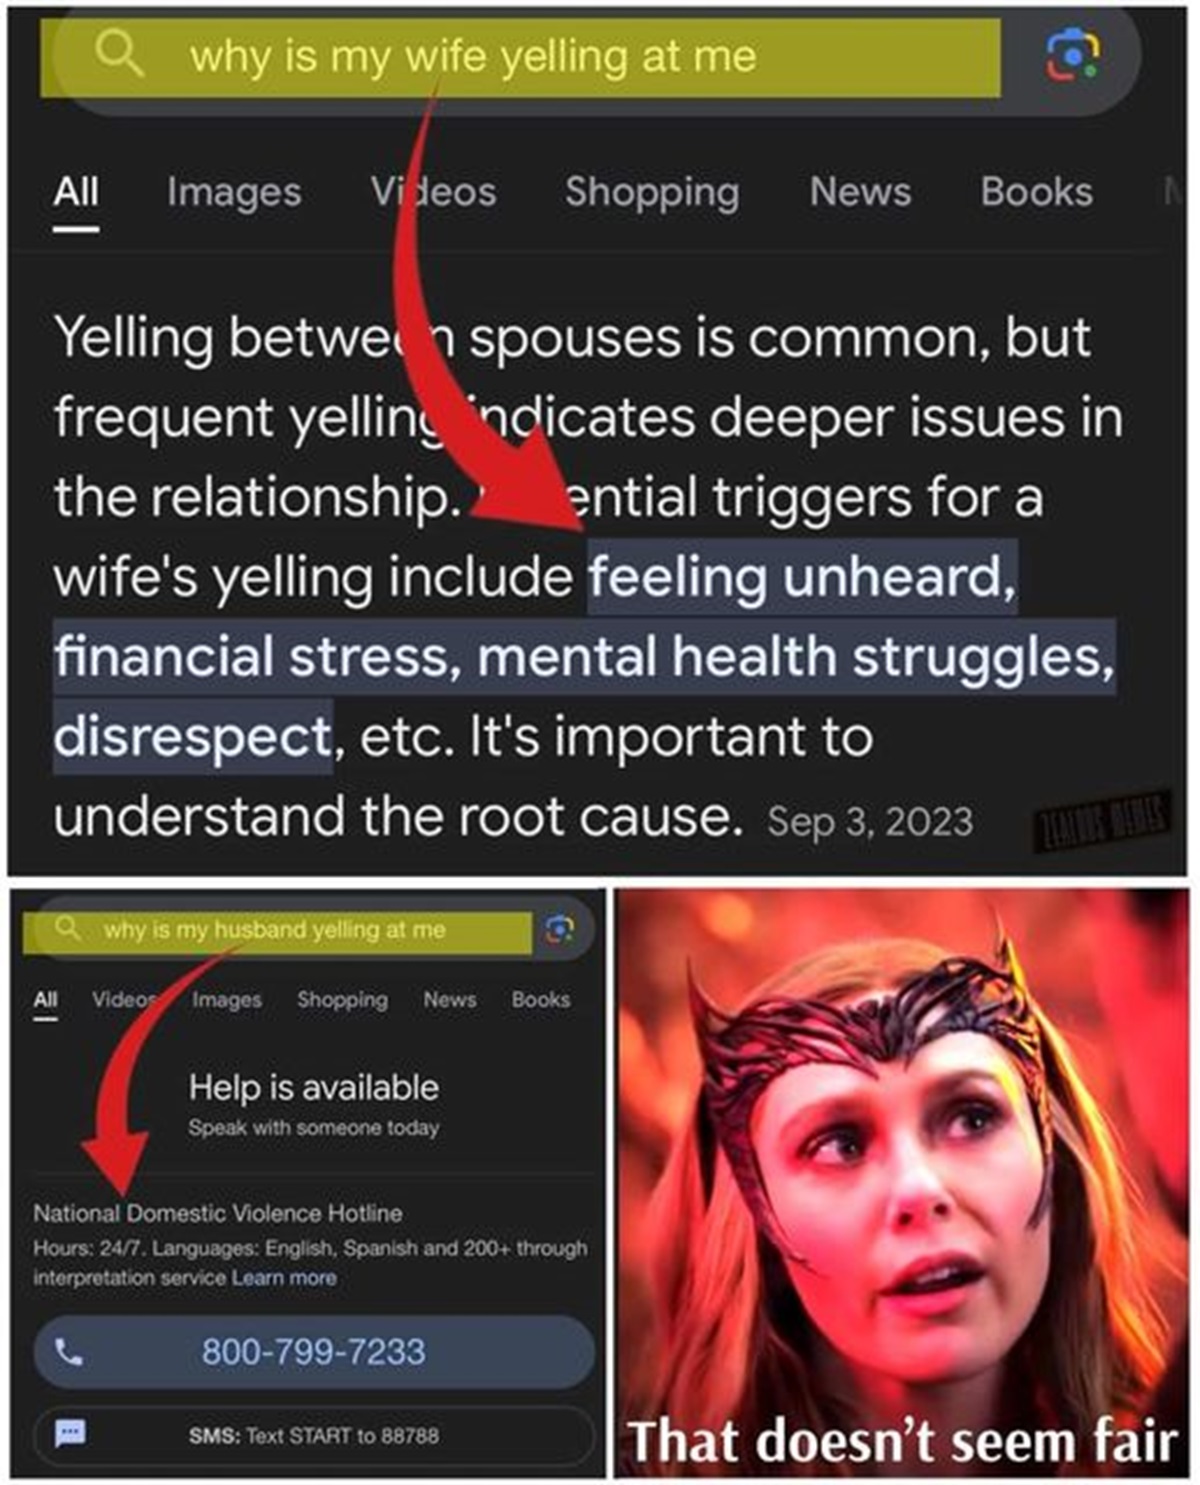 screenshot - Qwhy is my wife yelling at me All Images Videos Shopping News Books Yelling between spouses is common, but frequent yelling indicates deeper issues in the relationship. ential triggers for a wife's yelling include feeling unheard, financial s